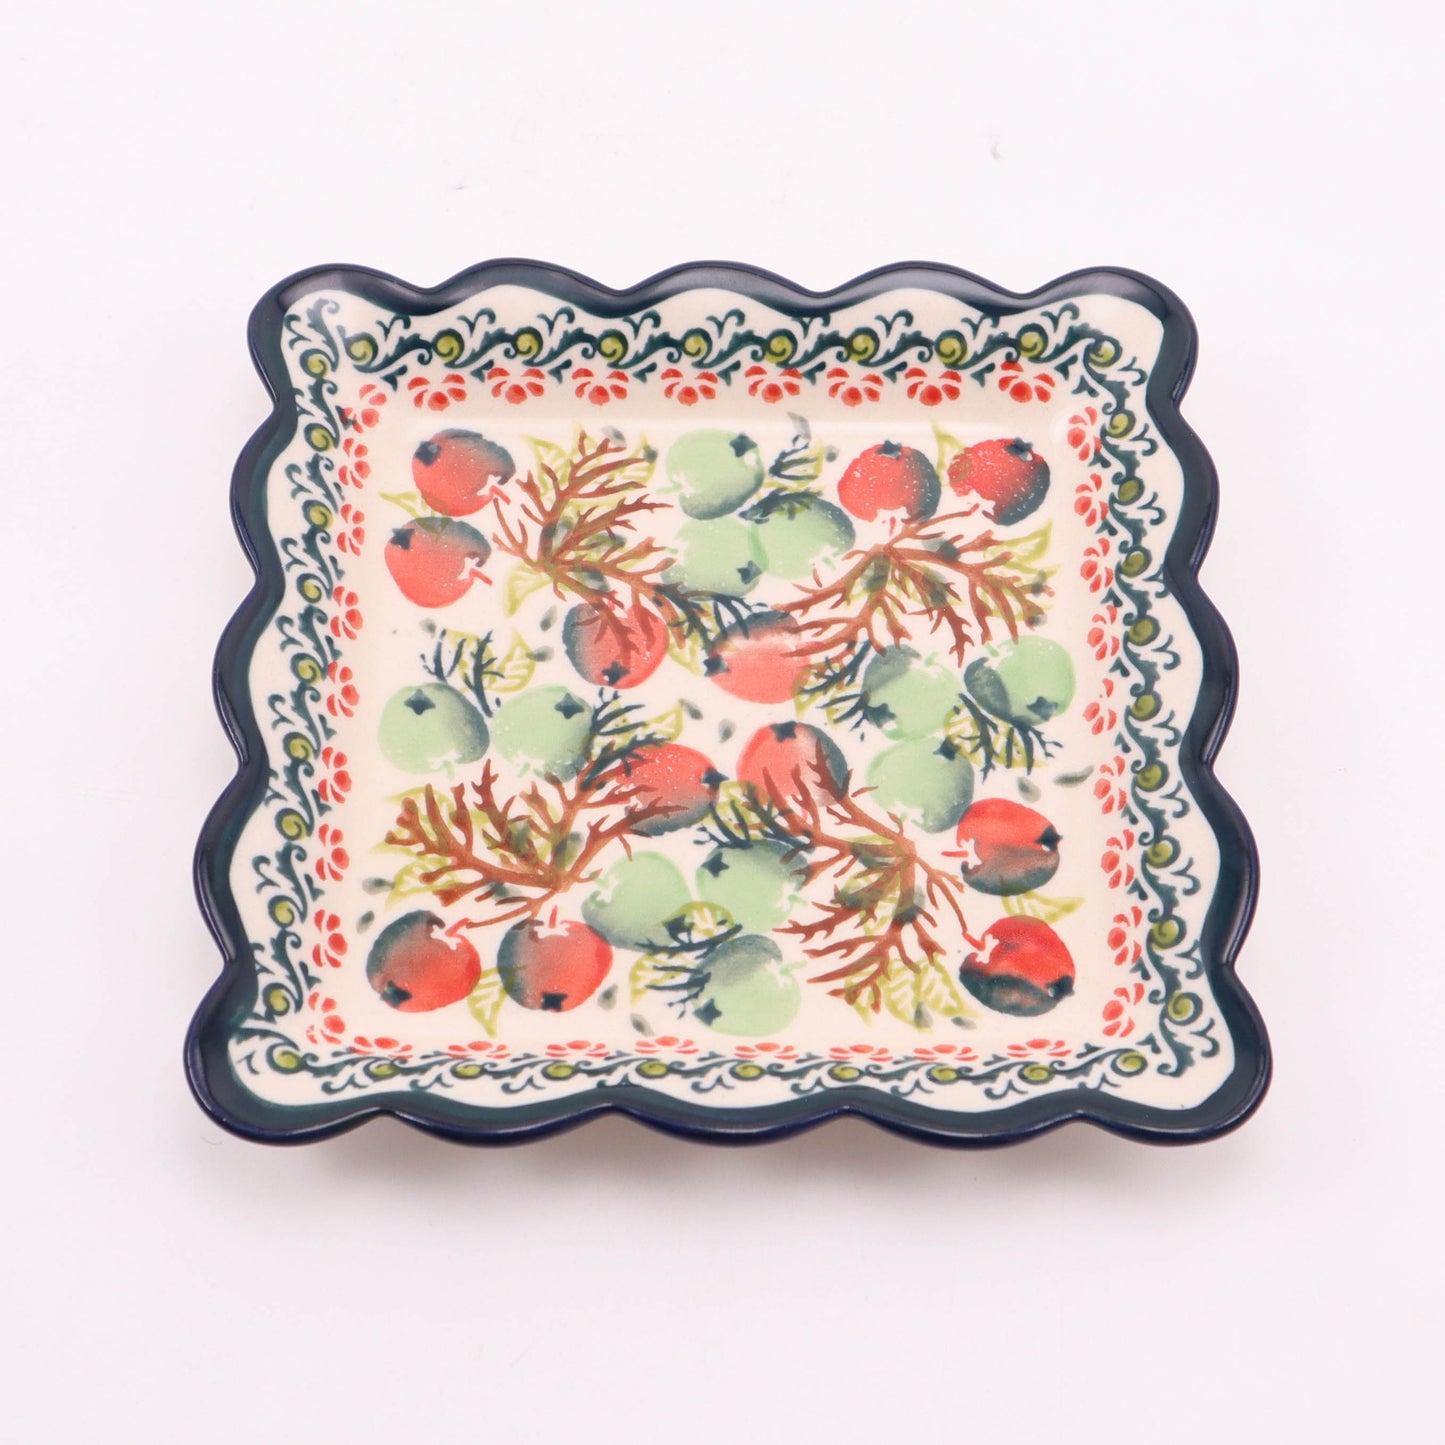 6.5" Square Ruffled Plate. Pattern: Orchard